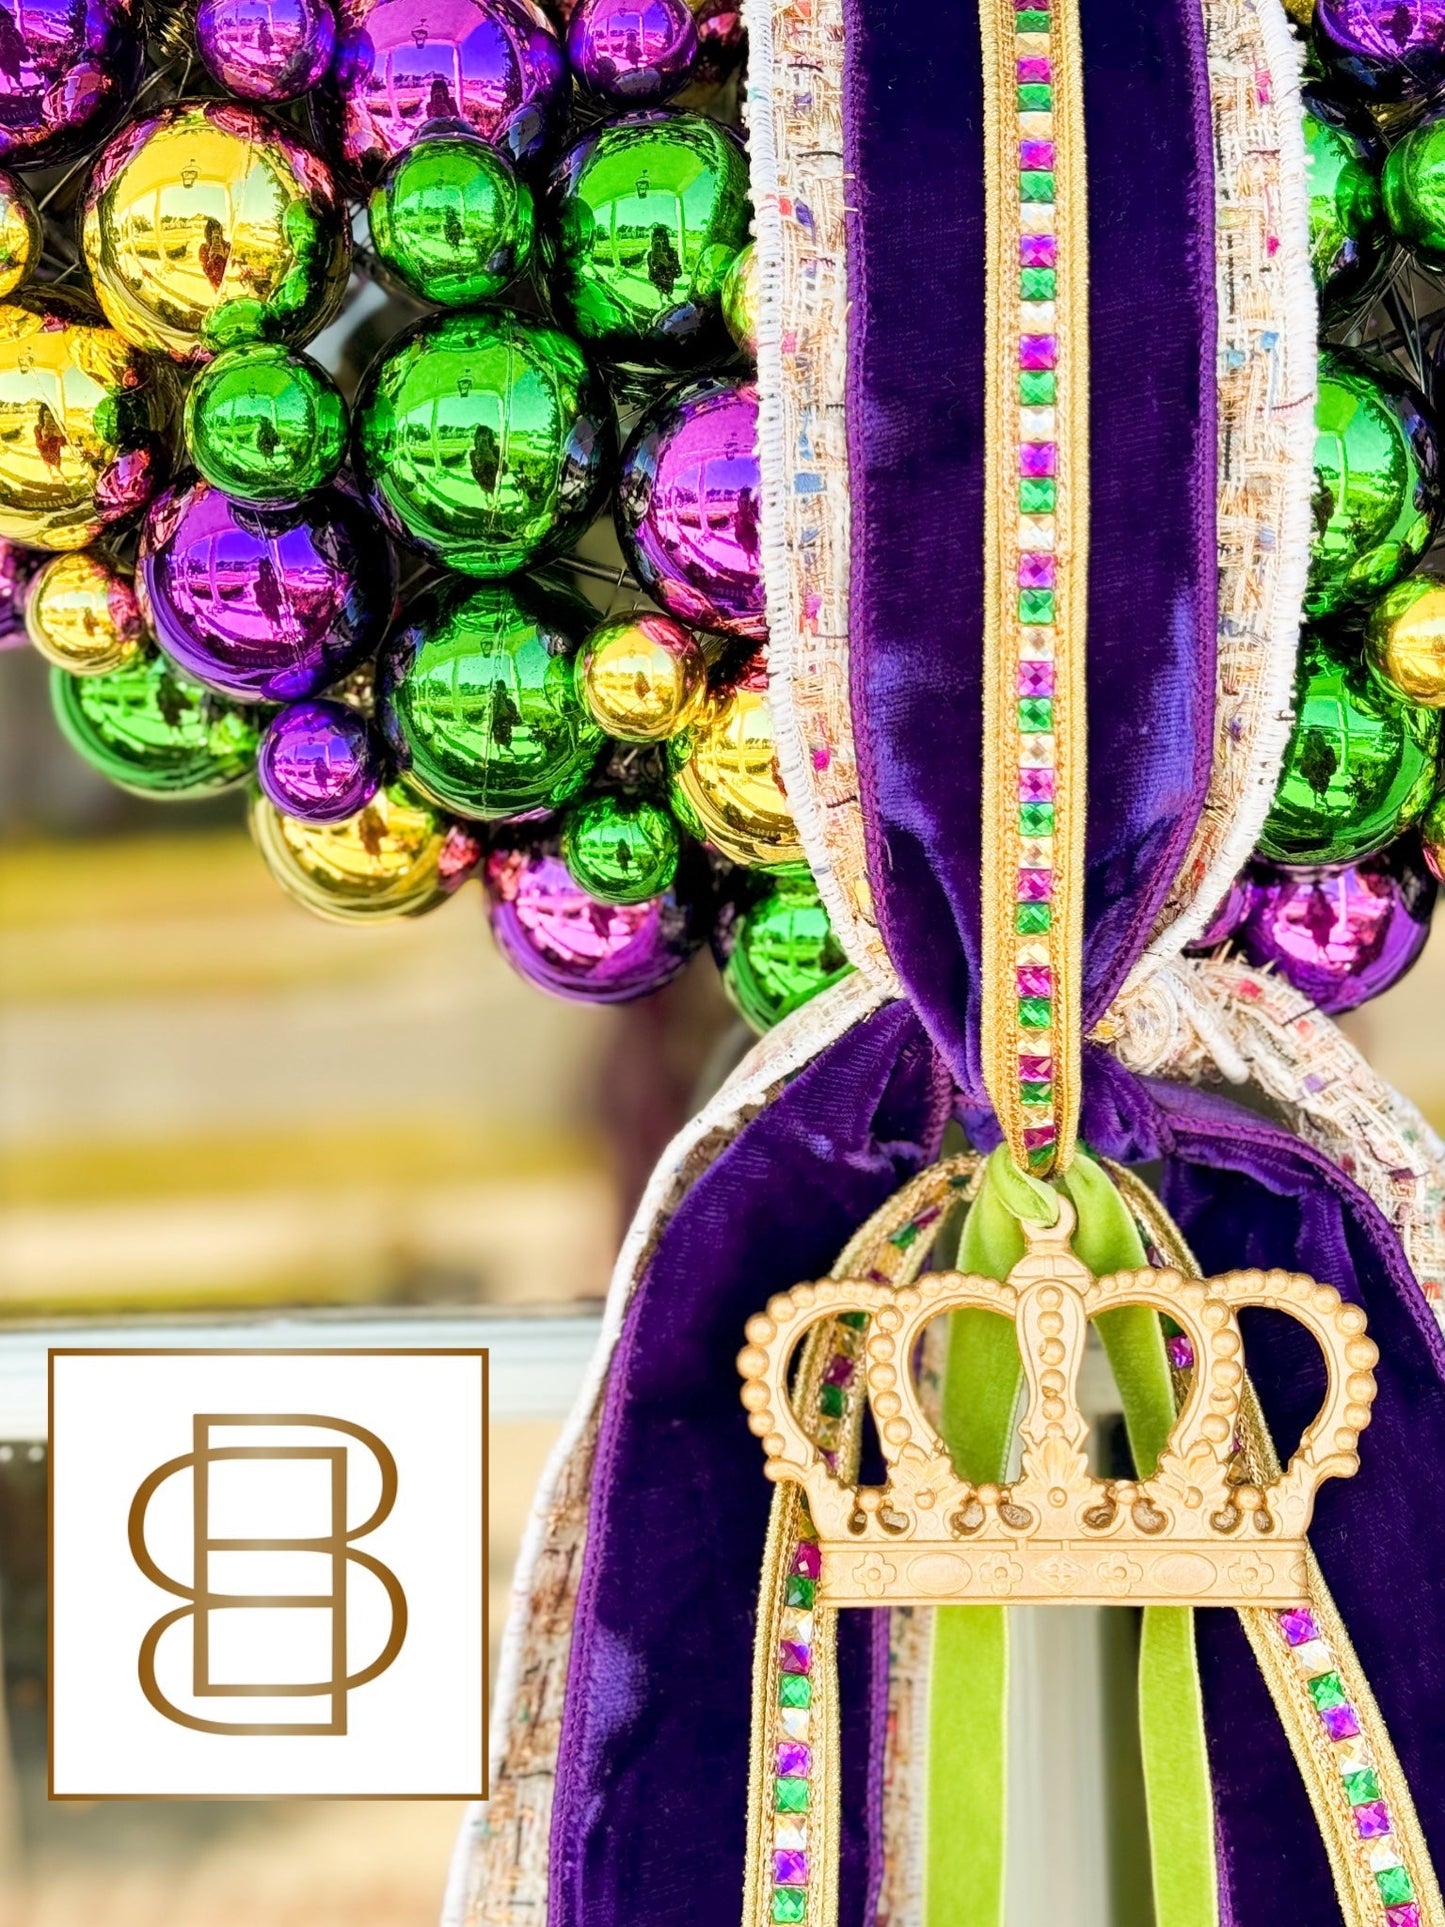 The Queen Of The Krewe Wreath And Sash